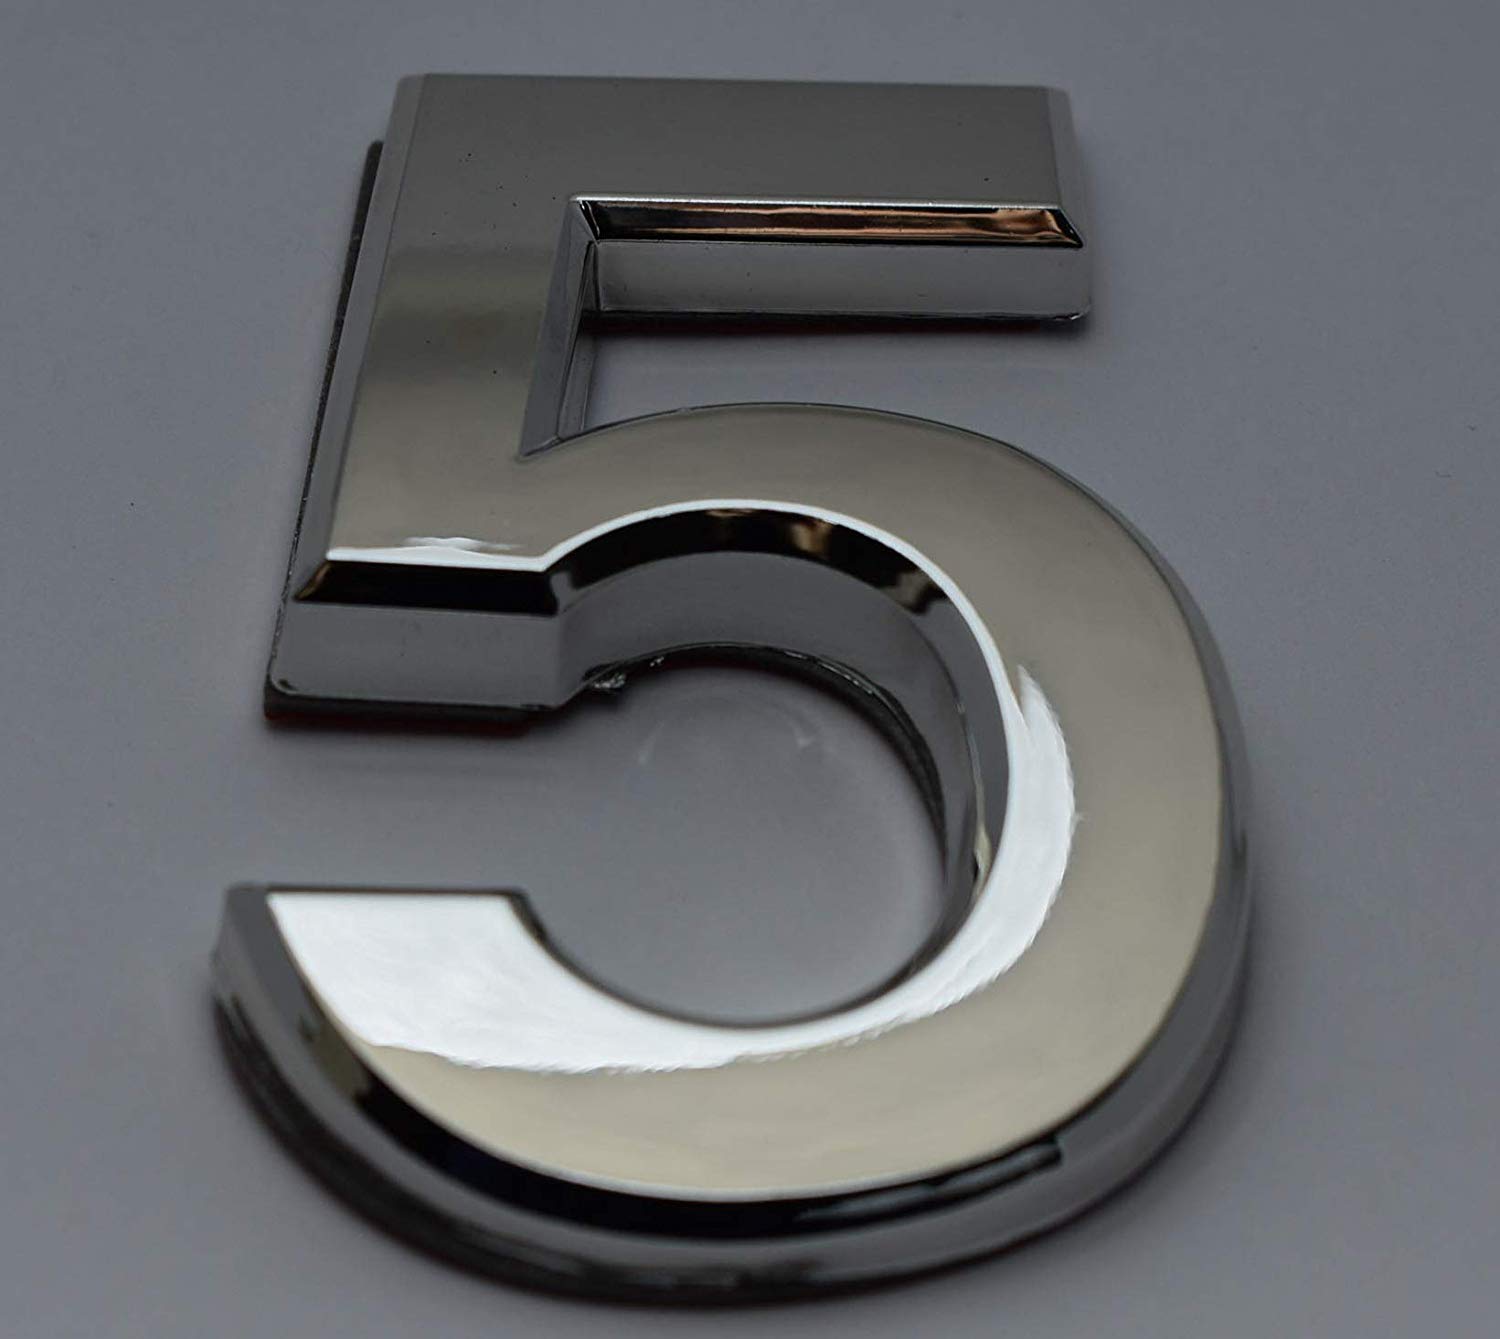 2 PCS - Apartment Number Sign/Mailbox Number Sign, Door Number Sign. Number 5 (Silver,3D, Size 2.75 x 1.75, Comes with Double Sided Tape)- The Maple line. - image 1 of 3